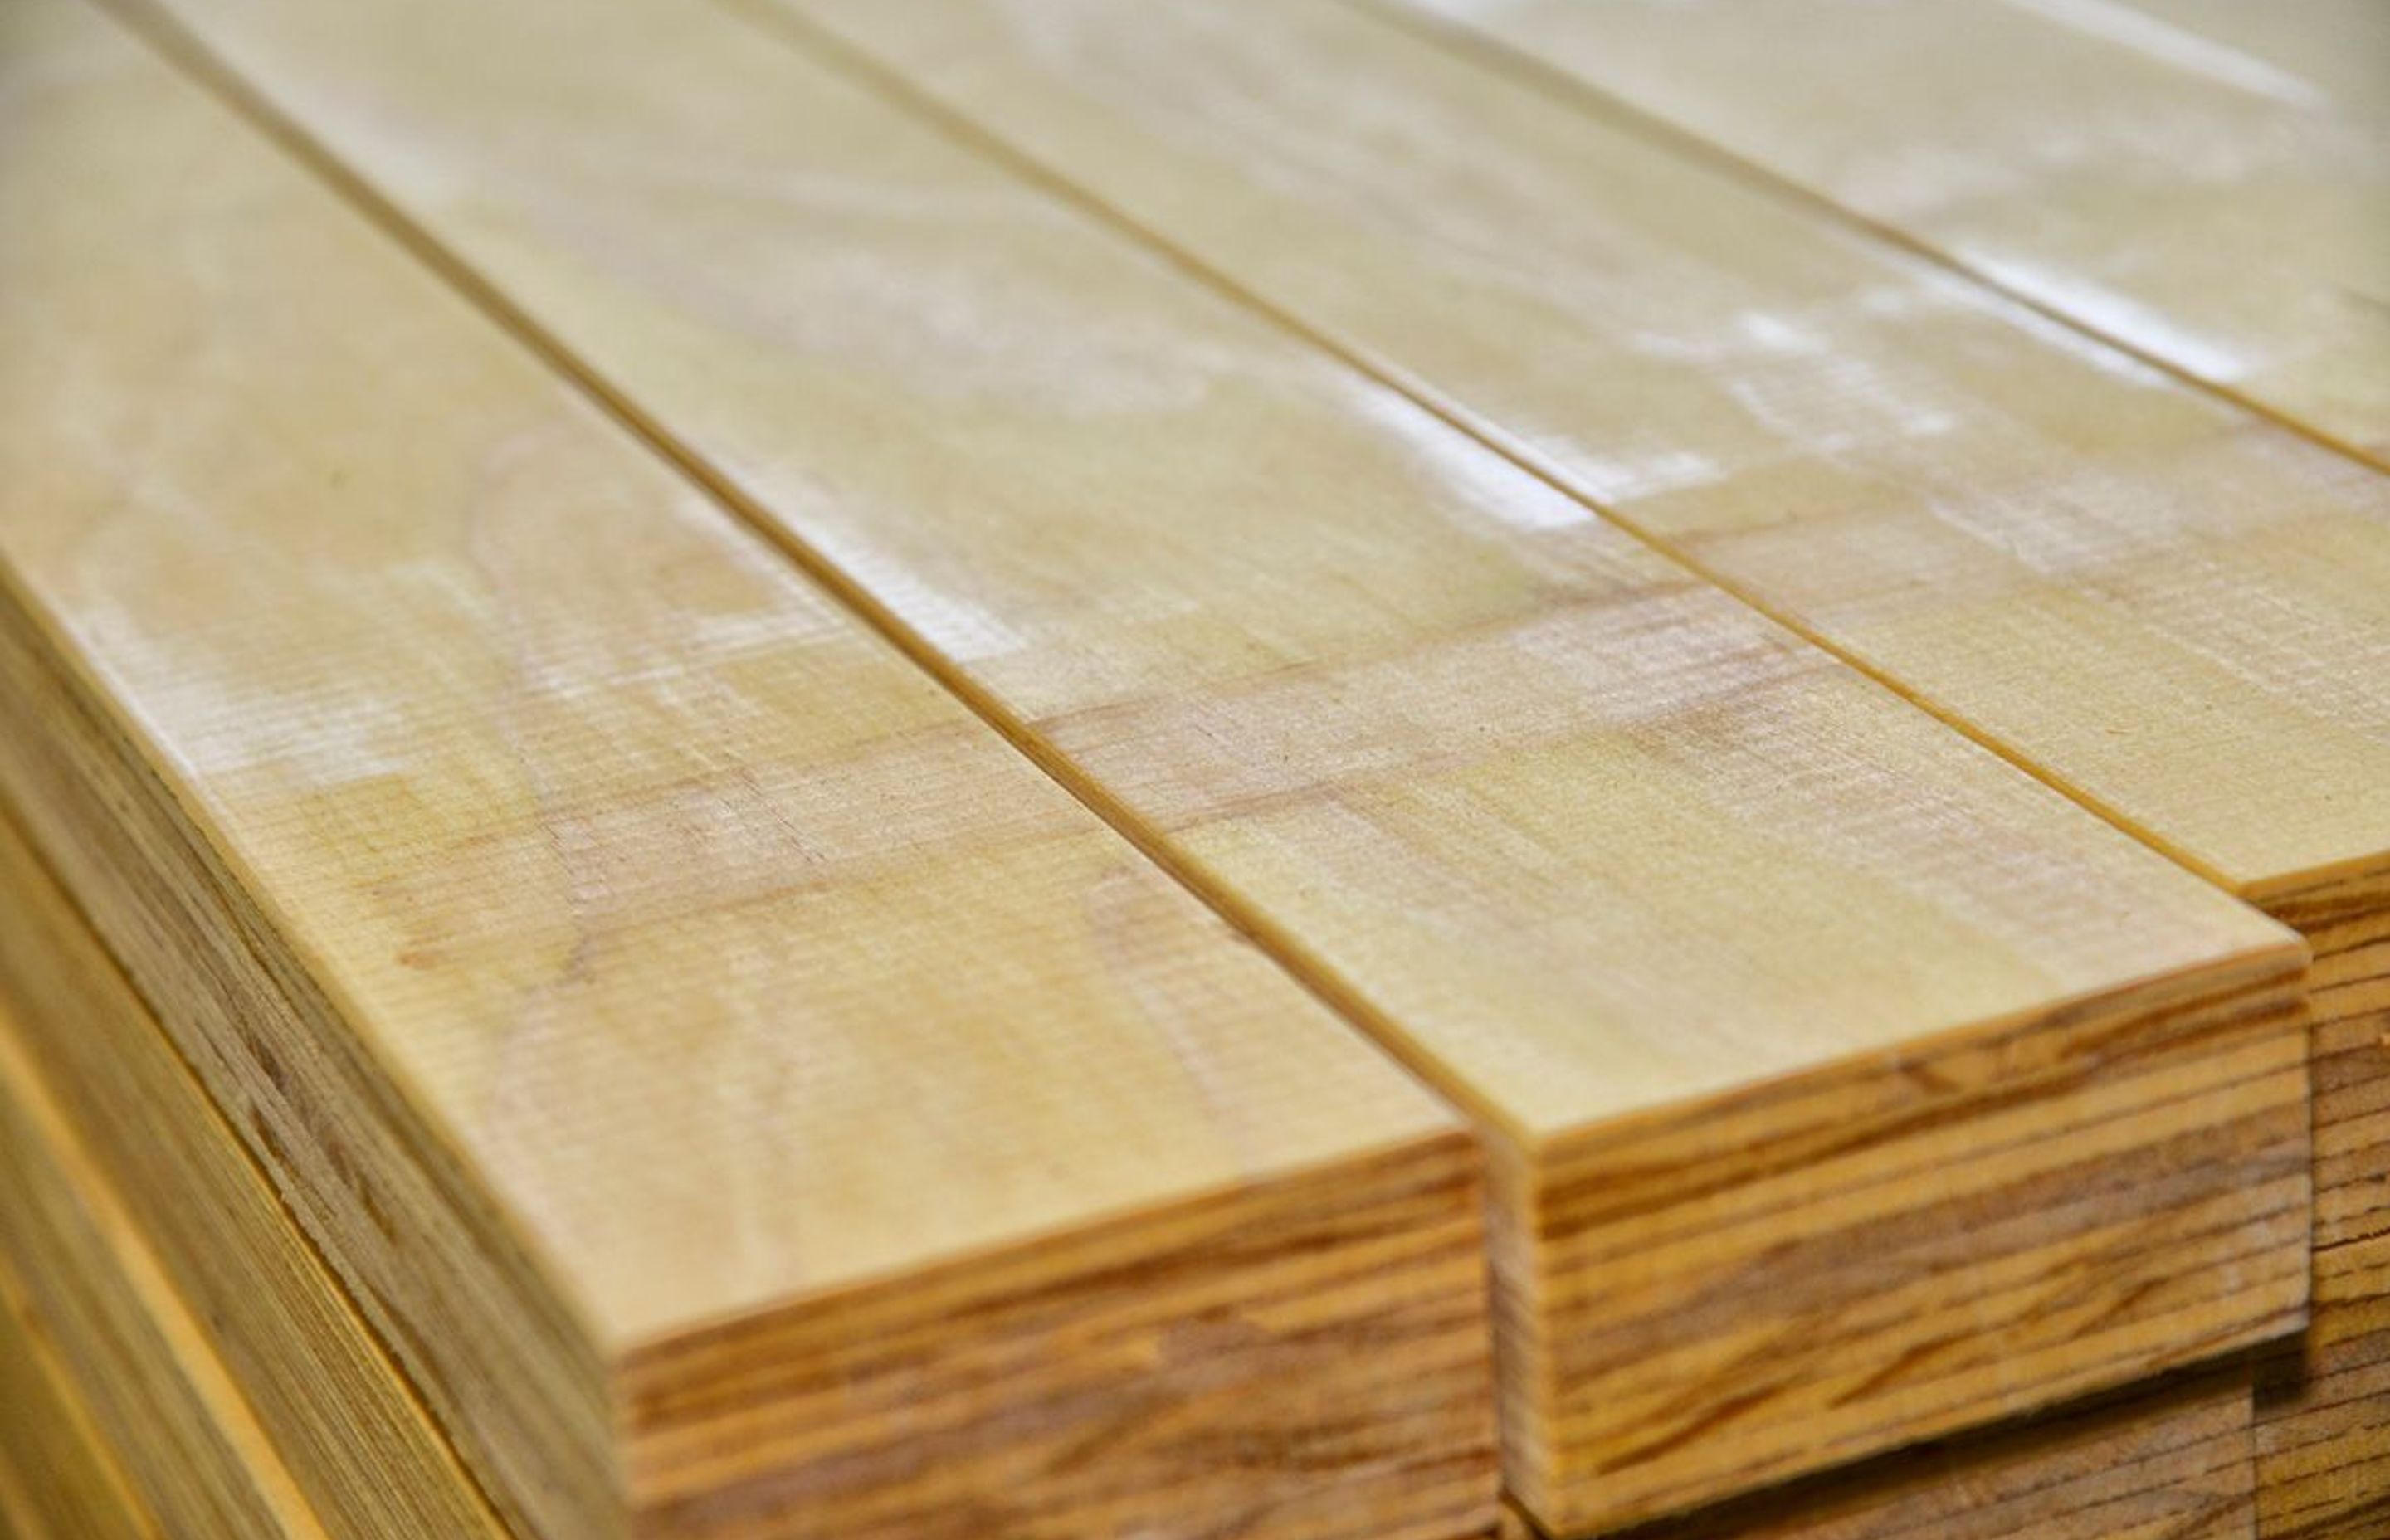 The J-Frame solution is a laminated veneer lumber product, a type of engineered timber.